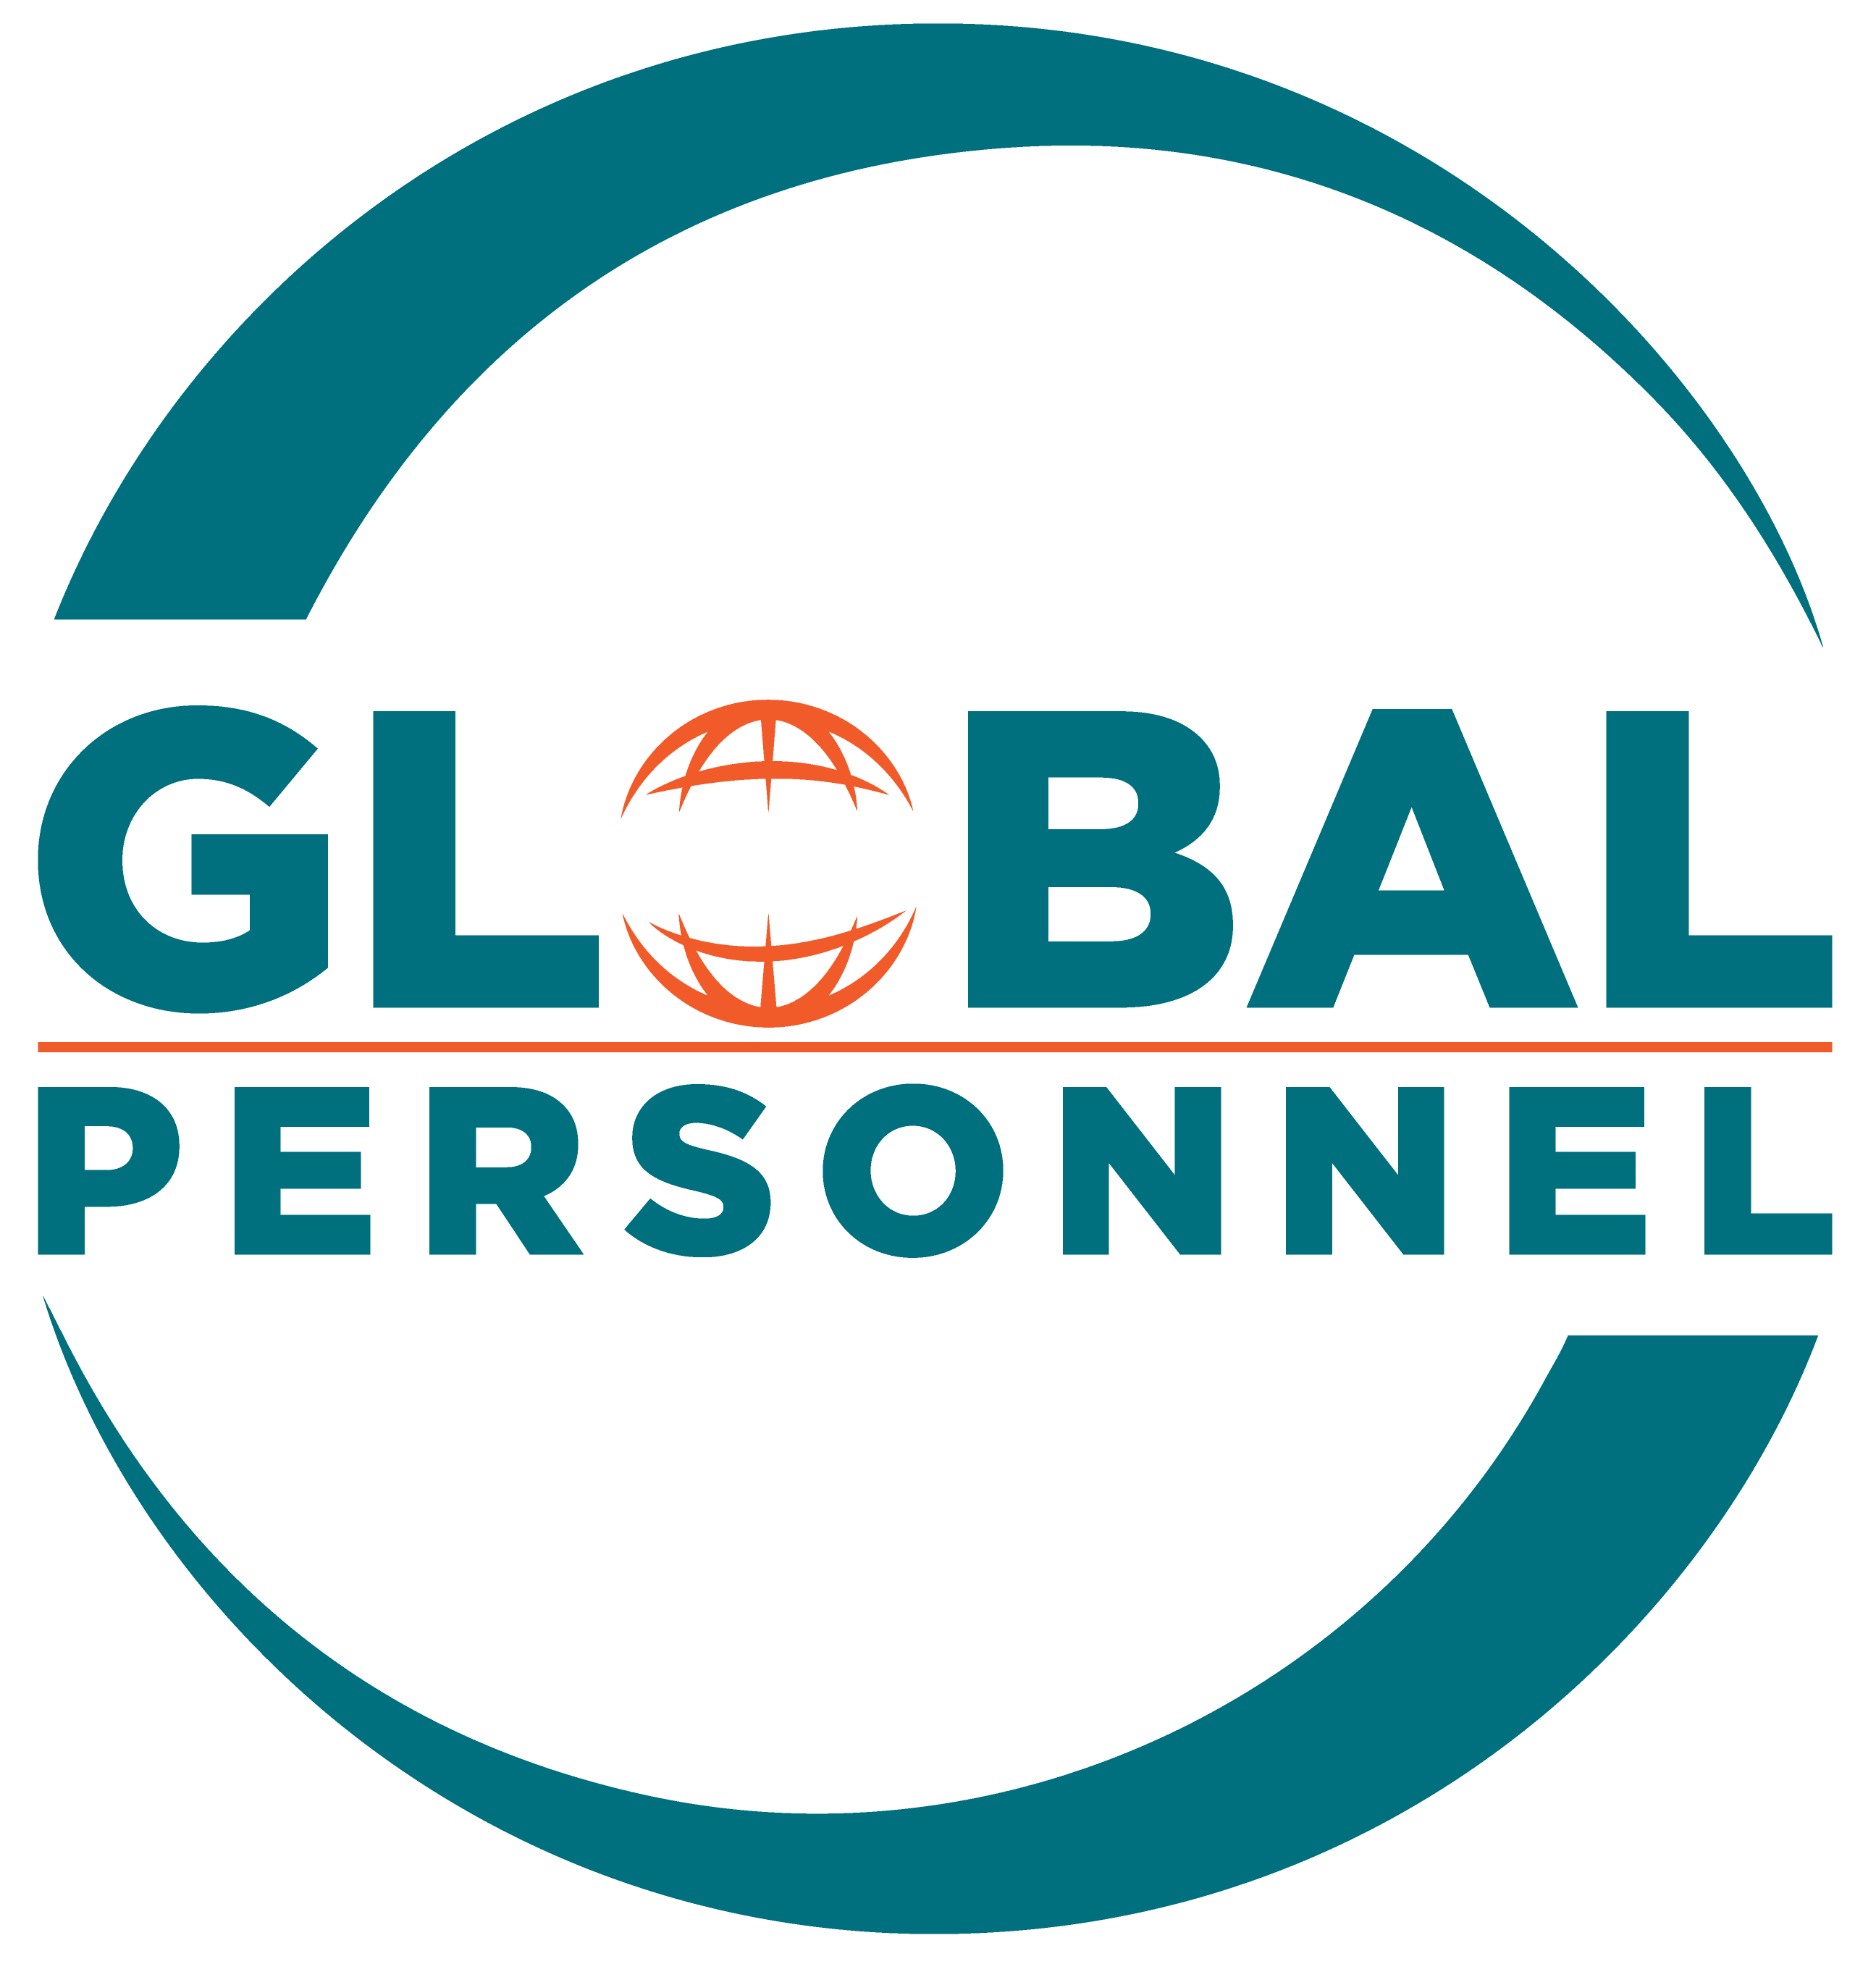 Global Personnel